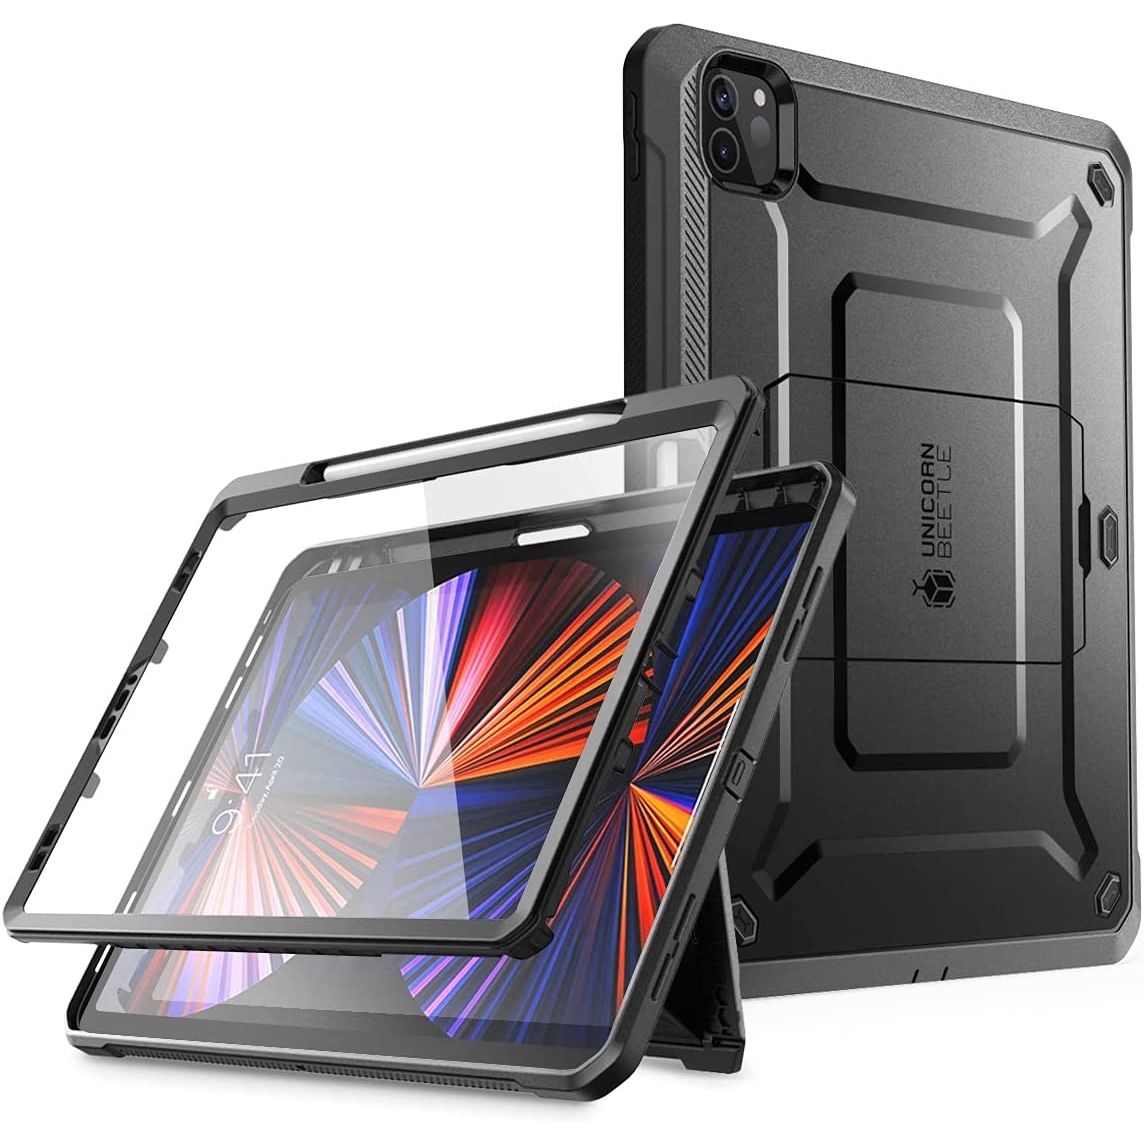 Render of the SUPCASE Unicorn Beetle Pro for 12.9-inch iPad Pro